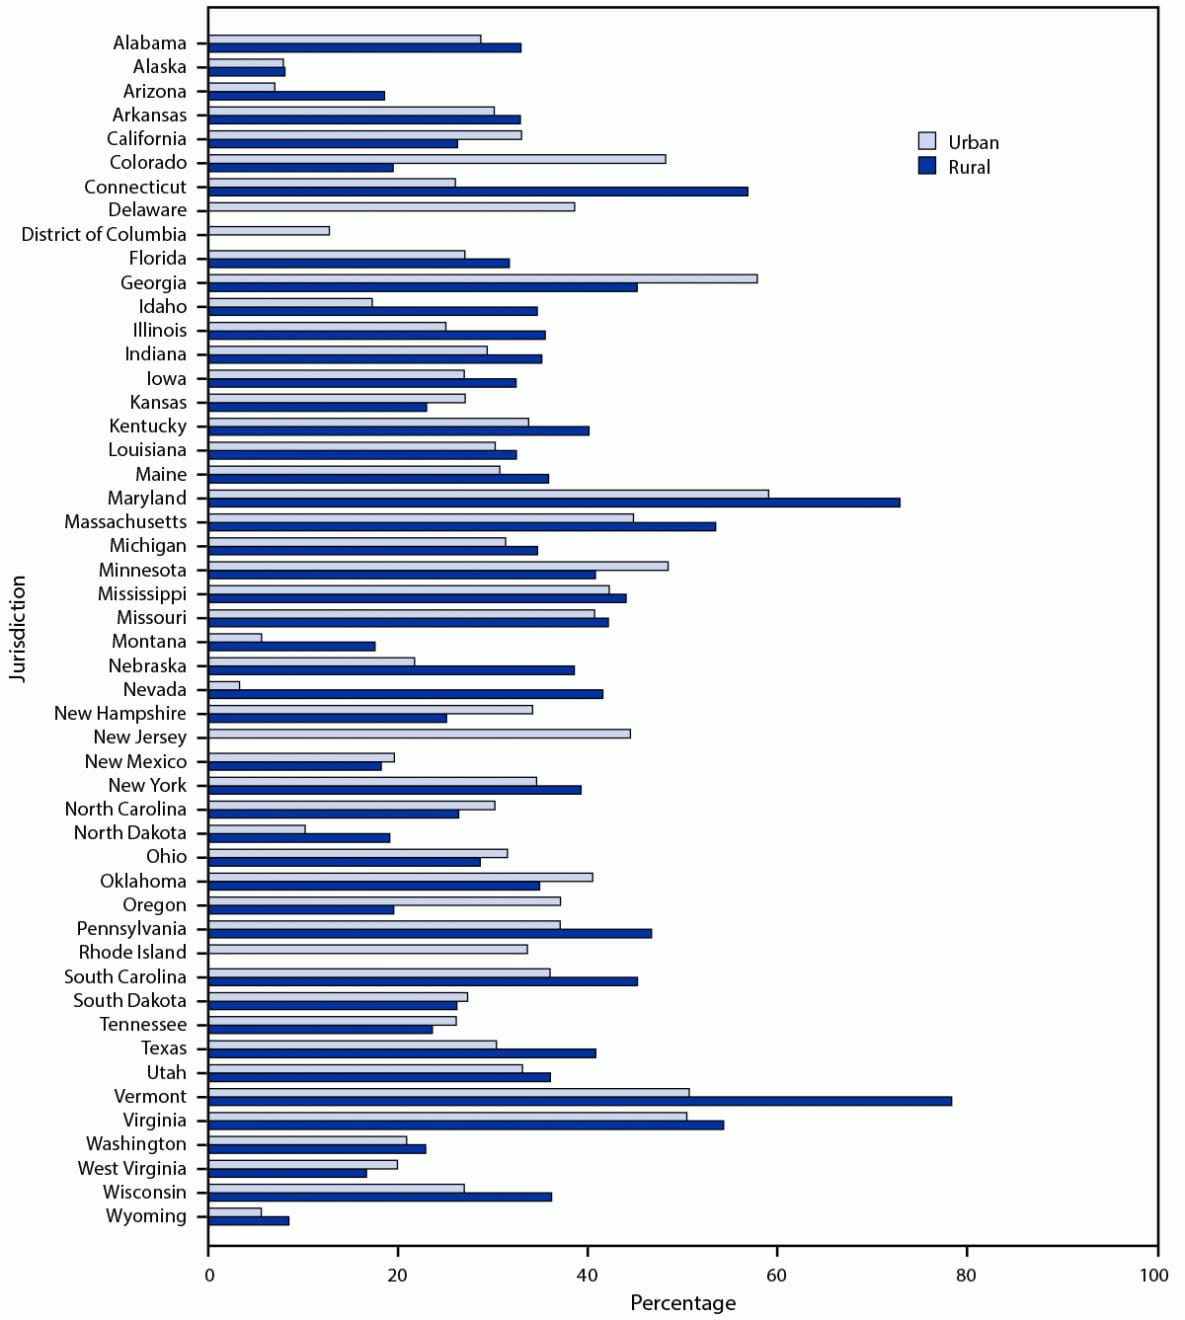 The figure is a bar graph showing the percentage of vaccinated persons who traveled outside their county of residence in the United States for their first dose of COVID-19 vaccine, by jurisdiction and urban-rural classification during December 14, 2020–April 10, 2021.